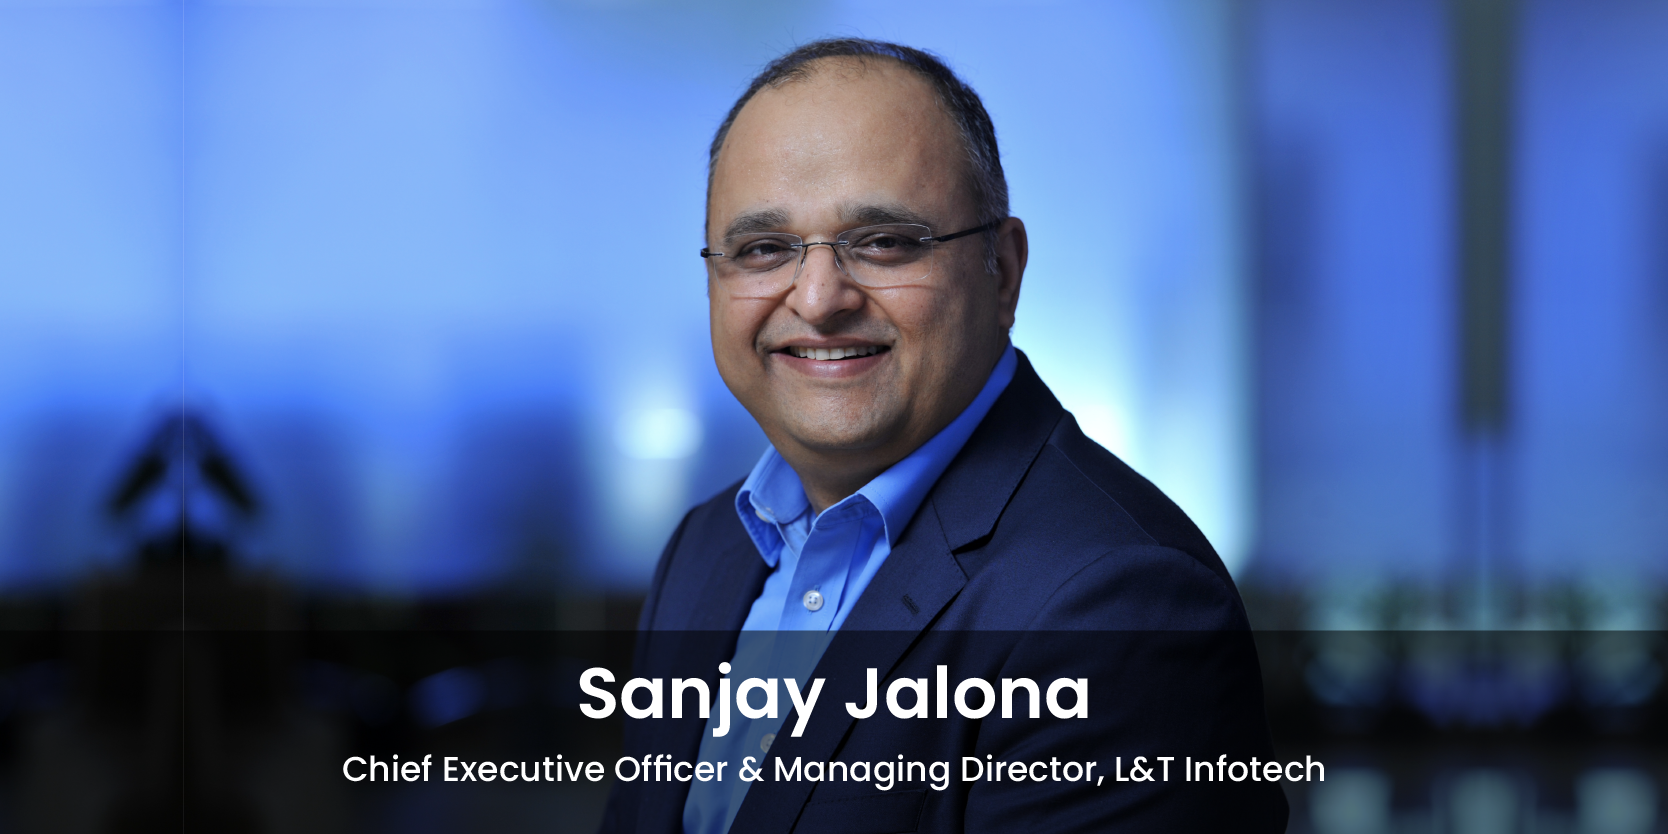 ESG is emerging as new area of enterprise spend: Jalona